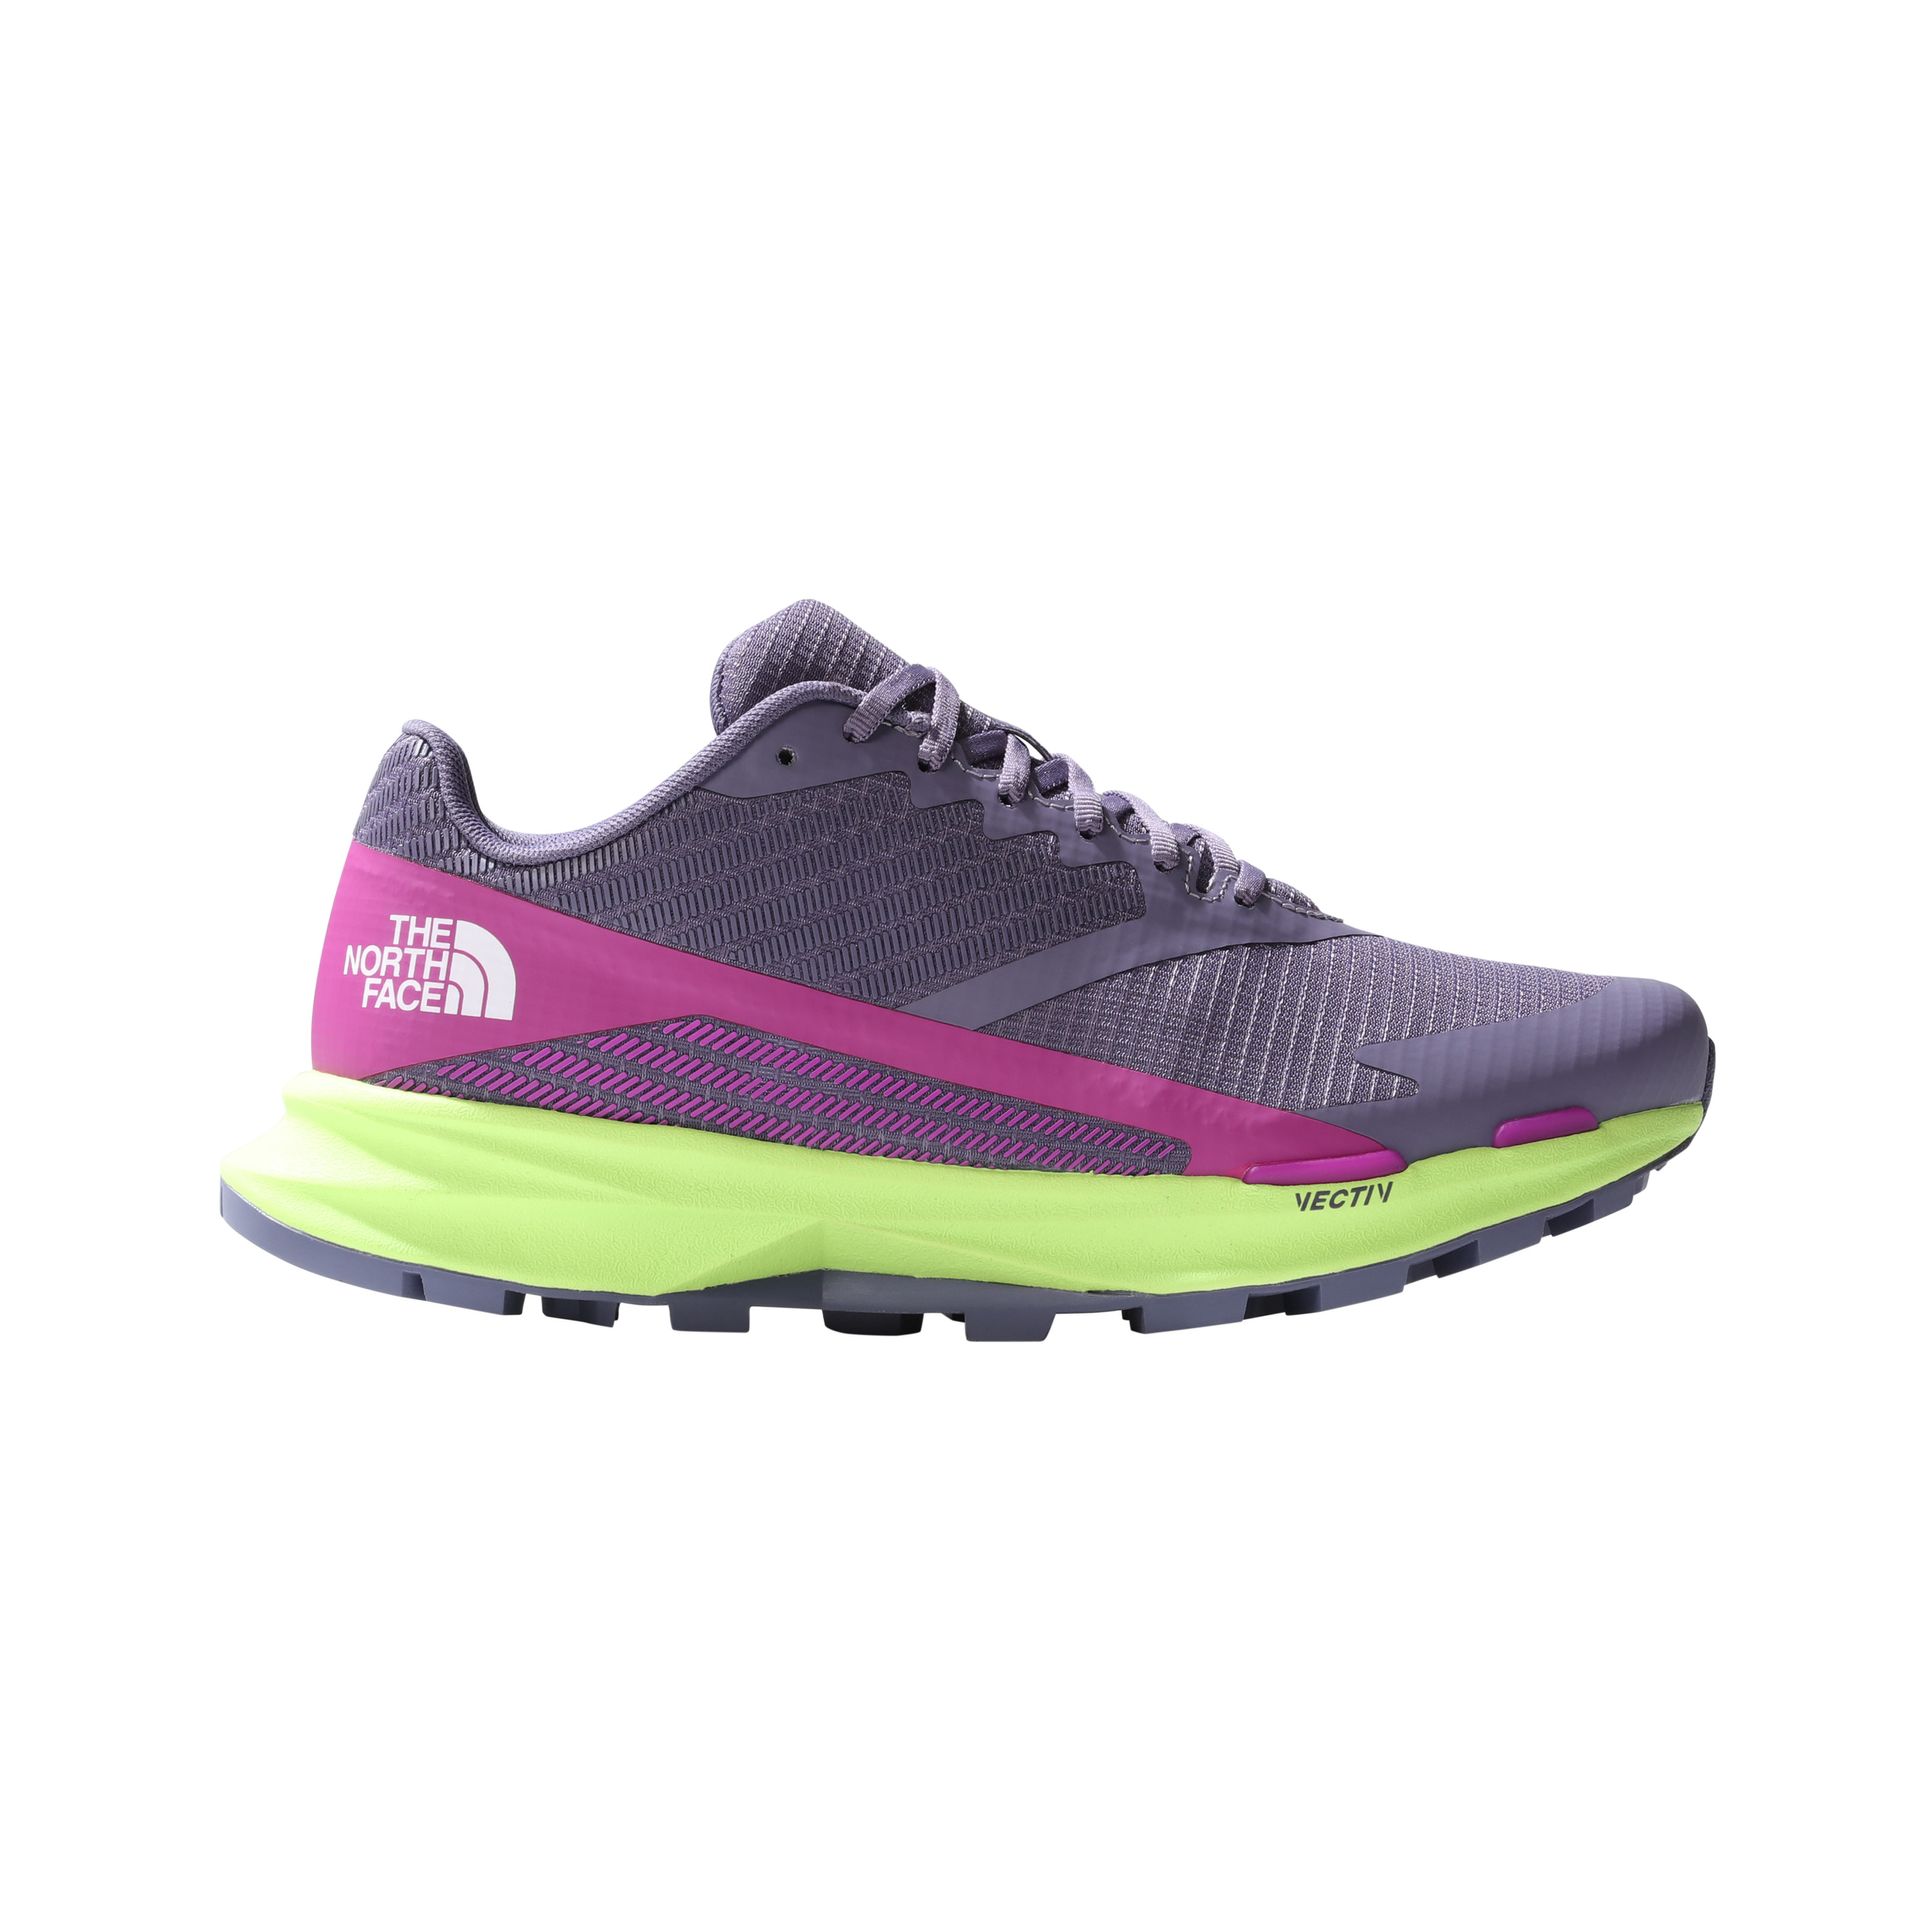 Damskie buty do biegania The North Face Vectiv Levitum lunar slate/led yellow - 38,5